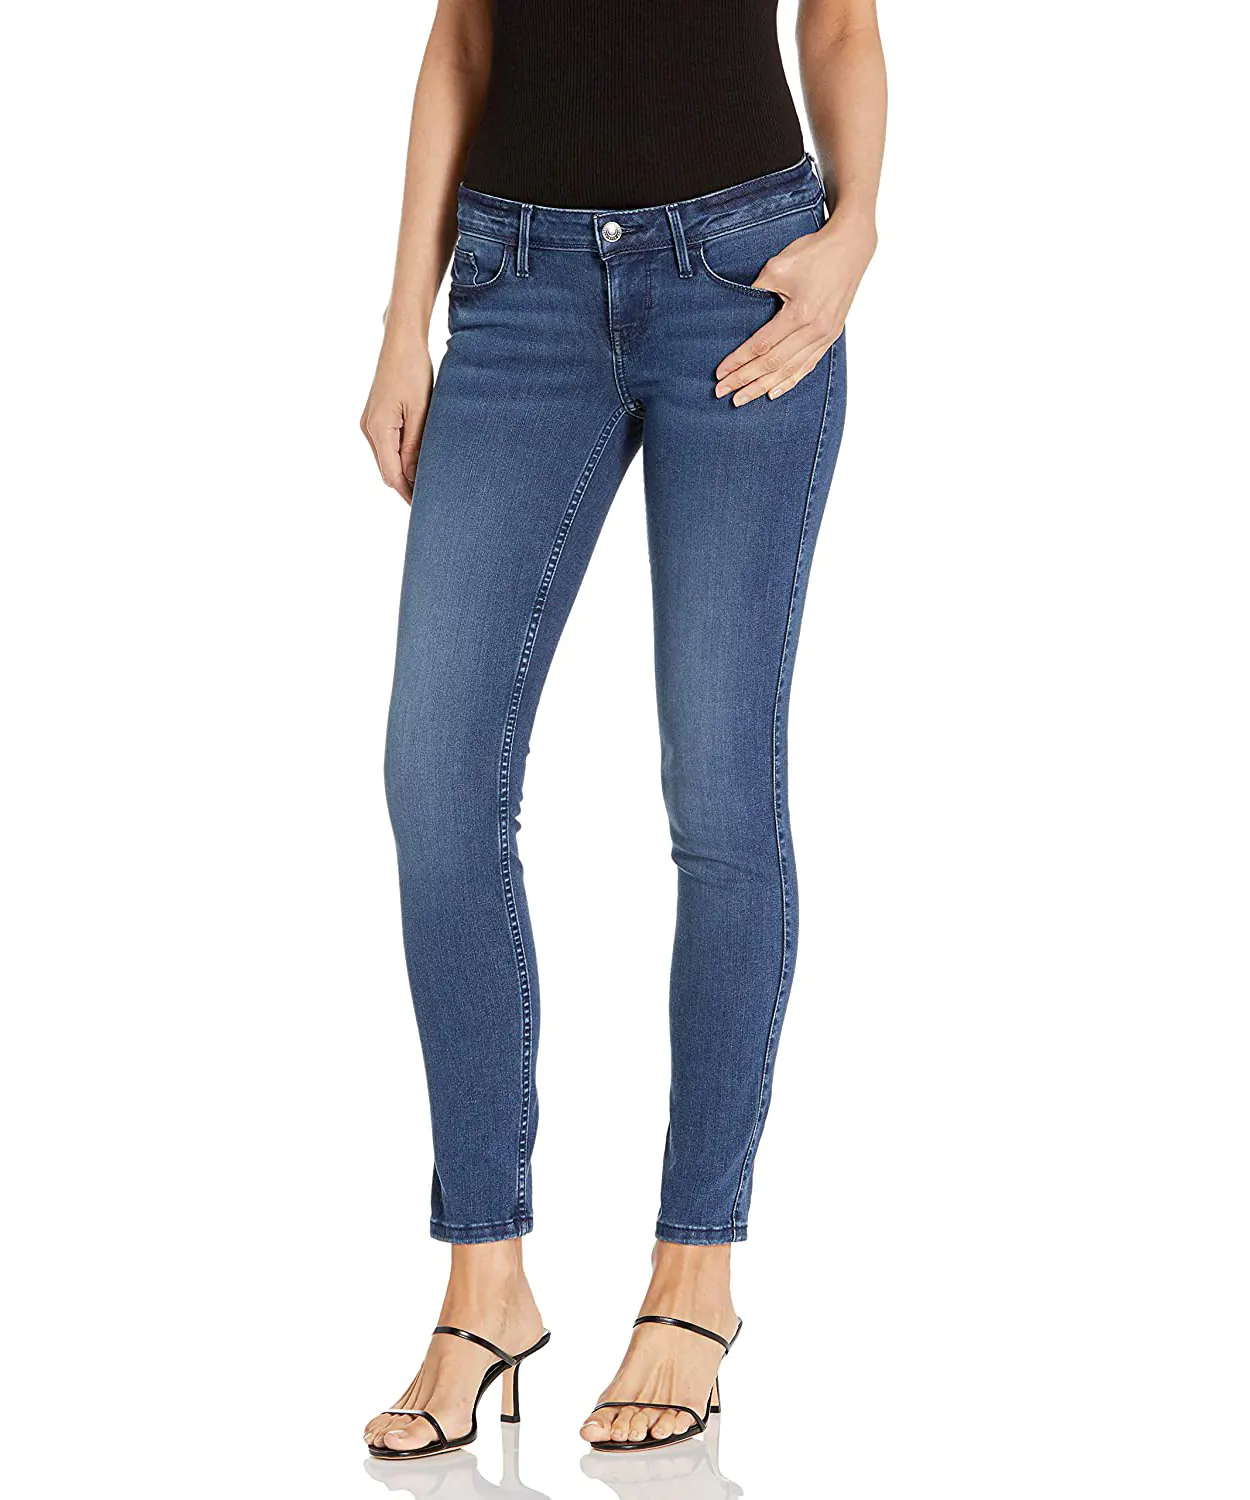 GUESS Women's Power Low Rise Stretch Skinny Fit Jeans